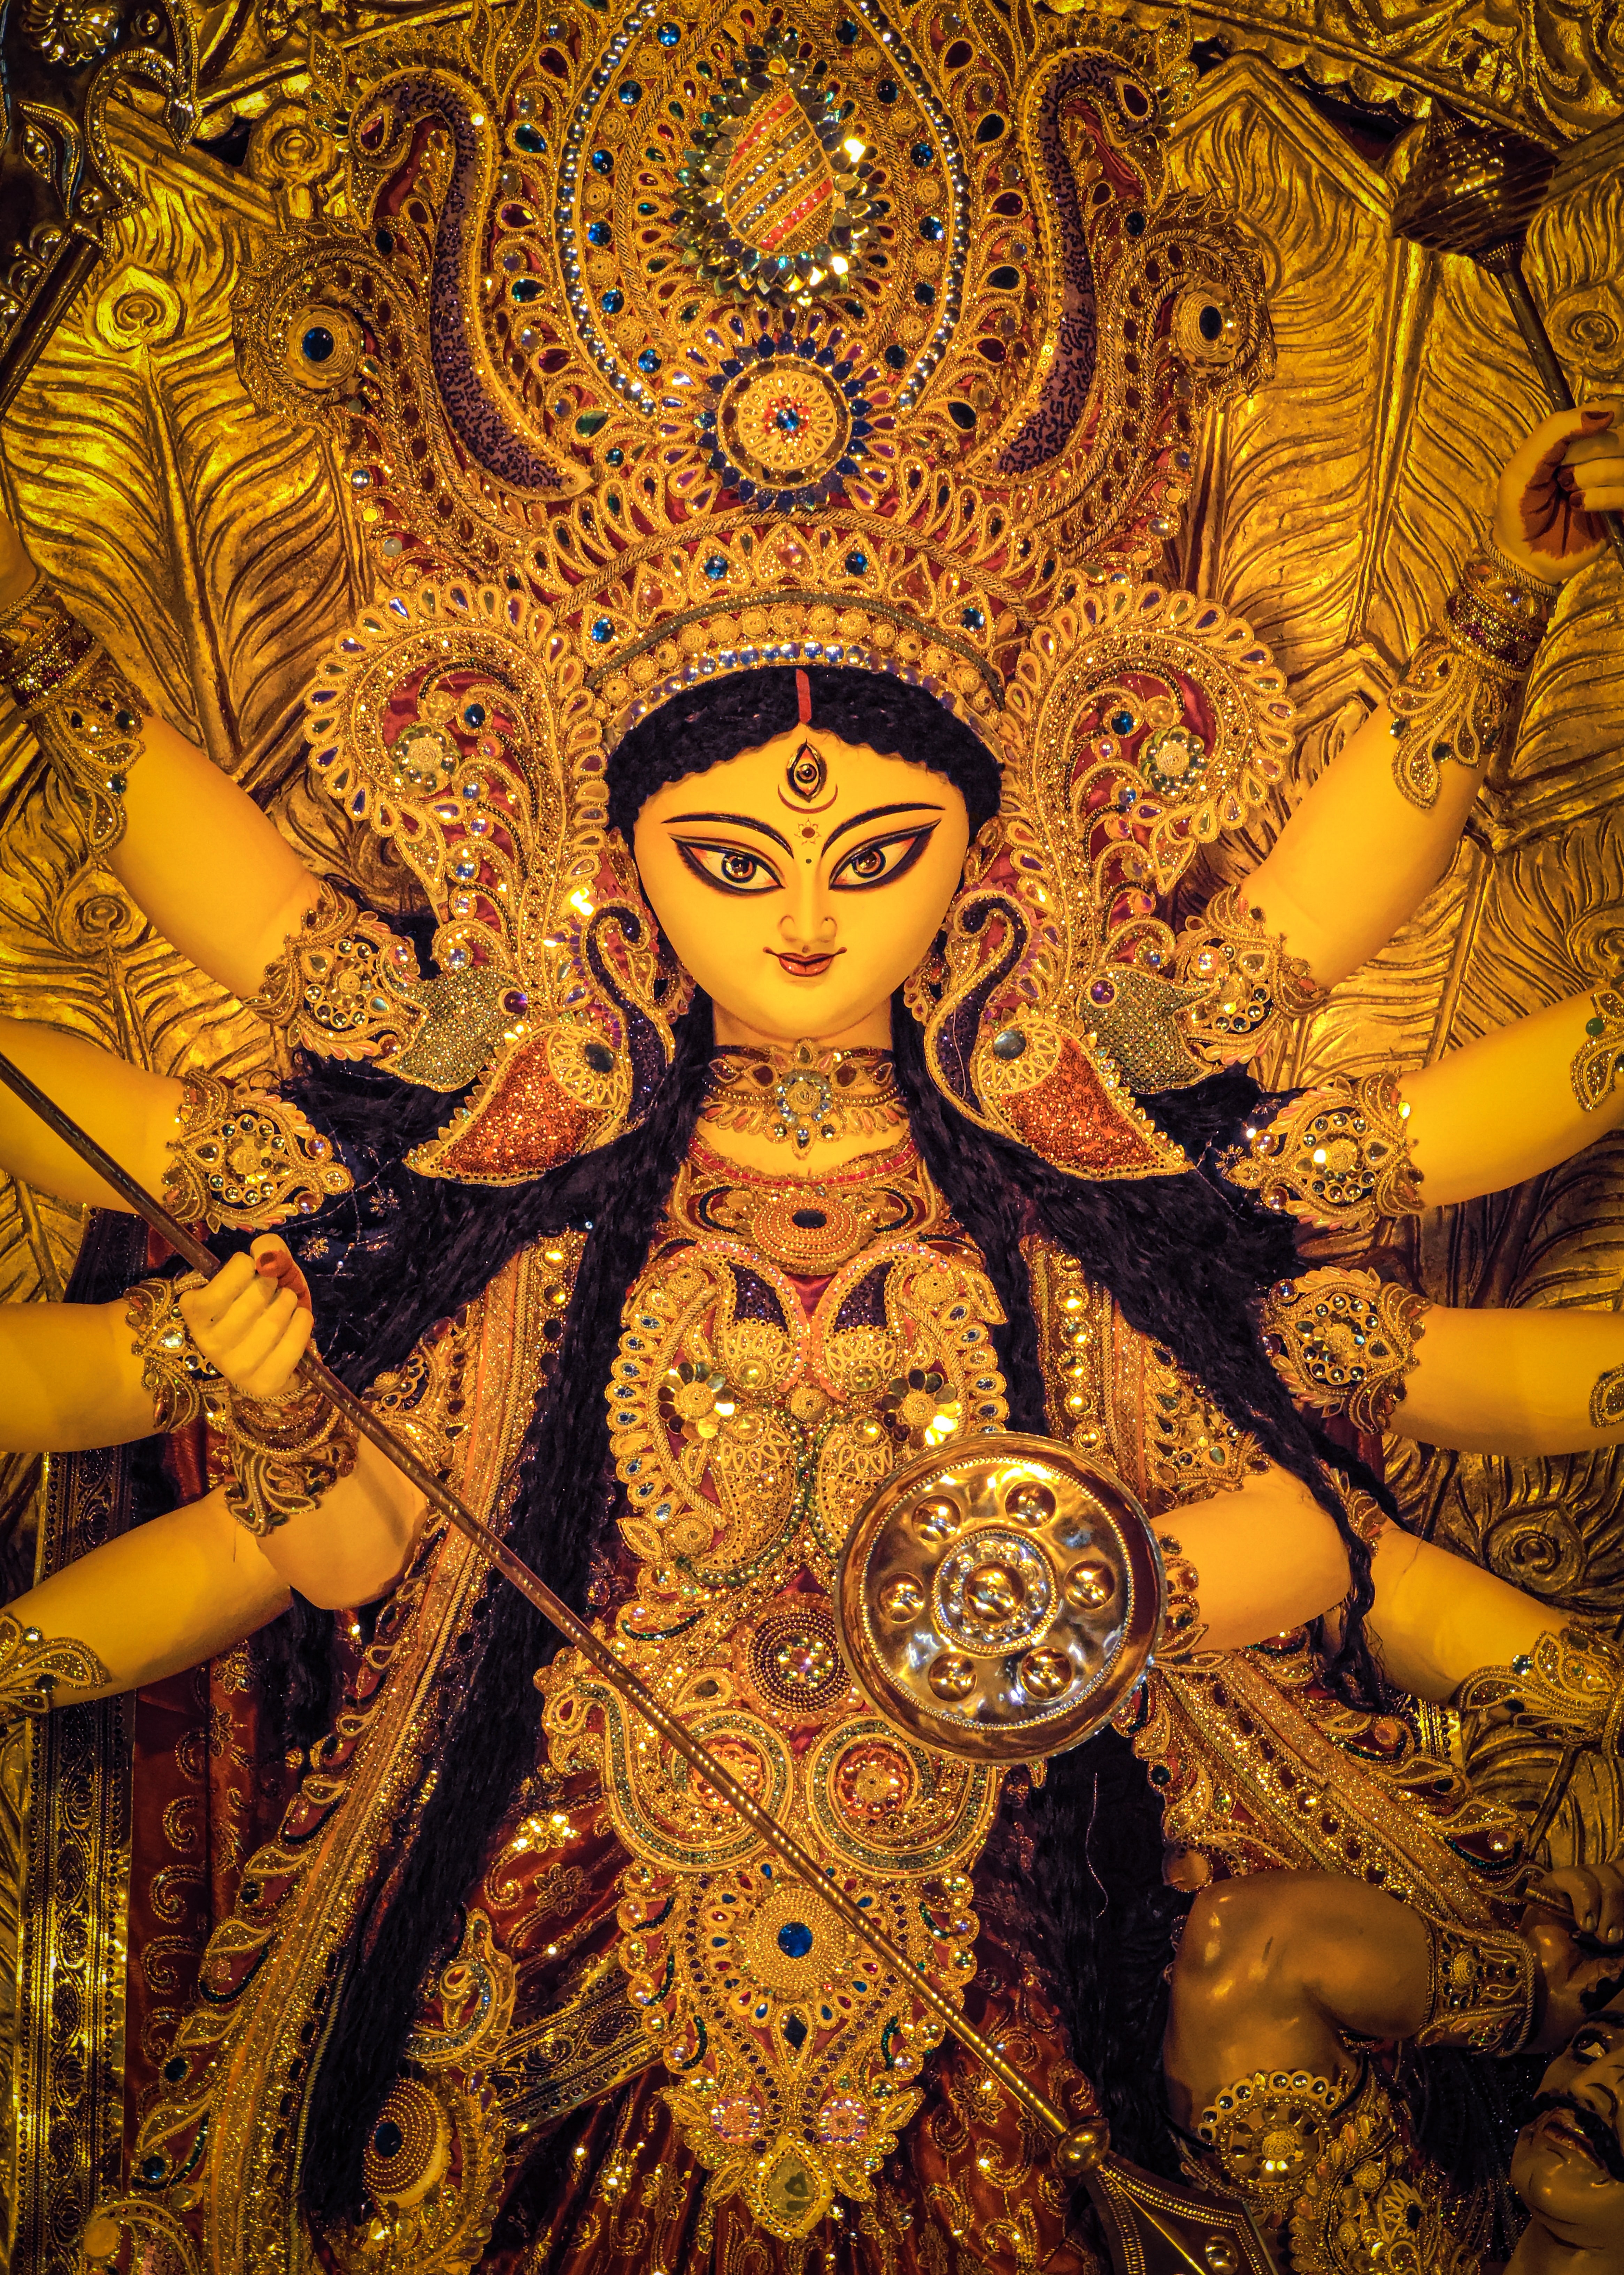 Lord Durga Images Wallpapers